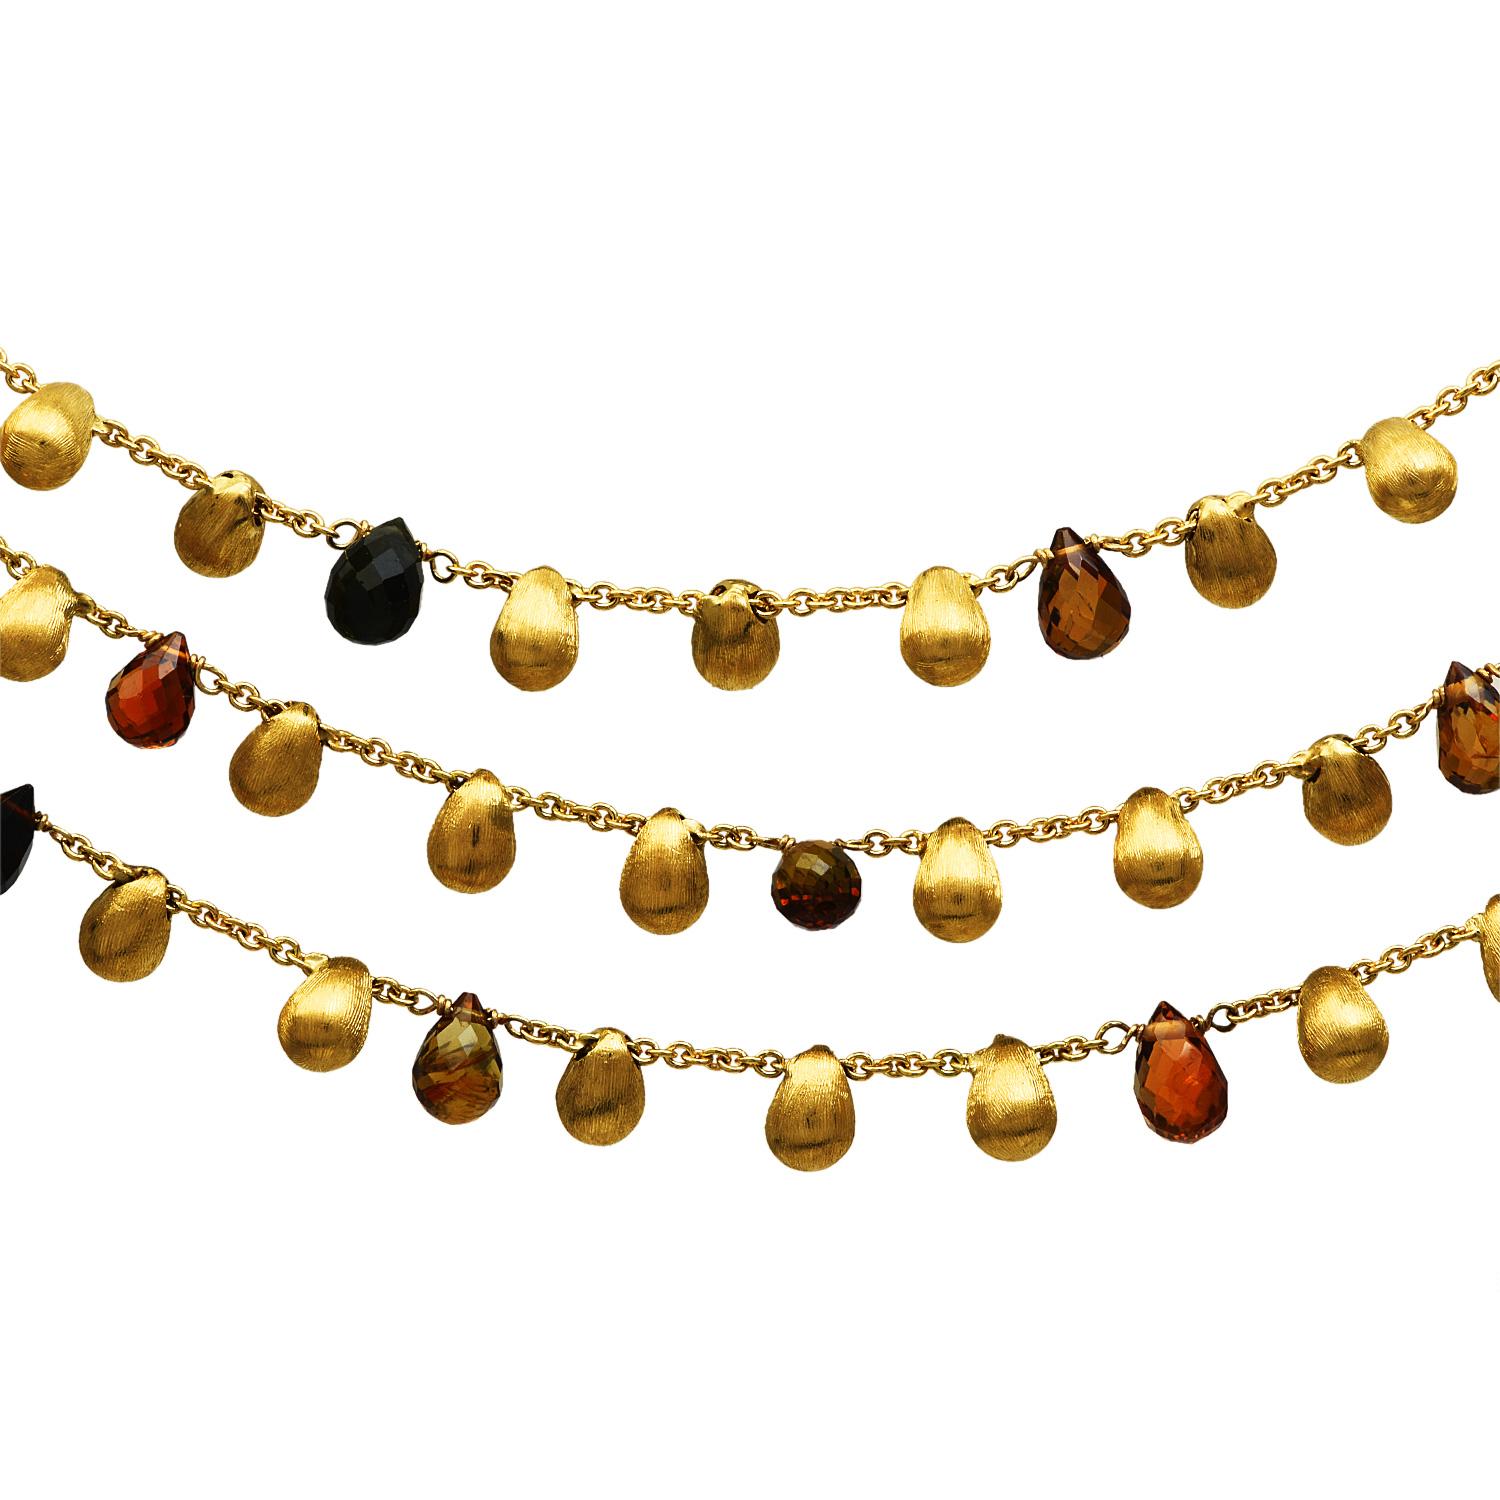 The overlapping of color and gold, with the strand design.

This exquisite necklace is crafted from his Paradise collection in solid 18K yellow gold, with textured beaded accents. a three-strand design 16